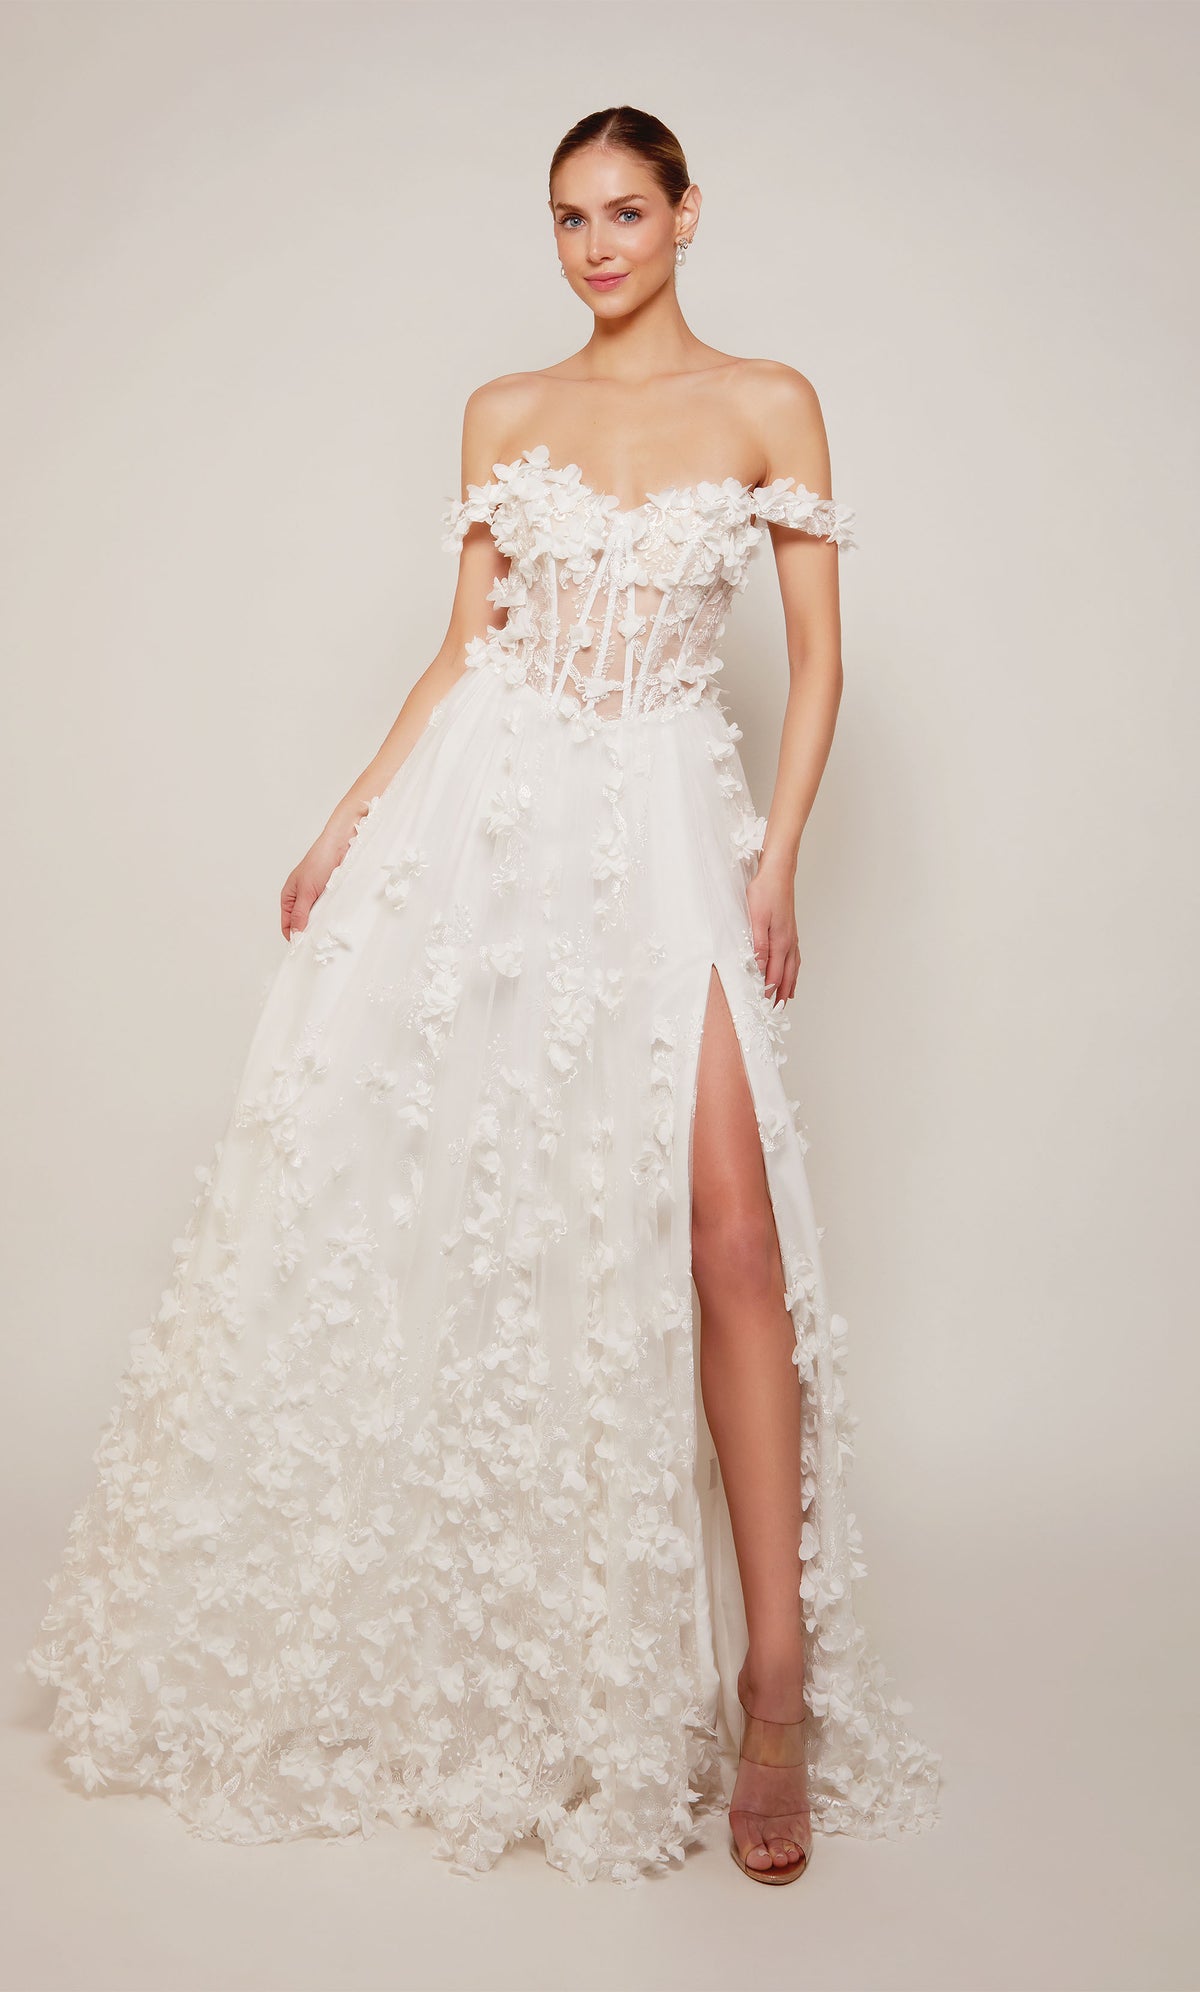 Ivory off the shoulder corset dress with an sheer lace up bodice and delicate 3d flowers throughout.